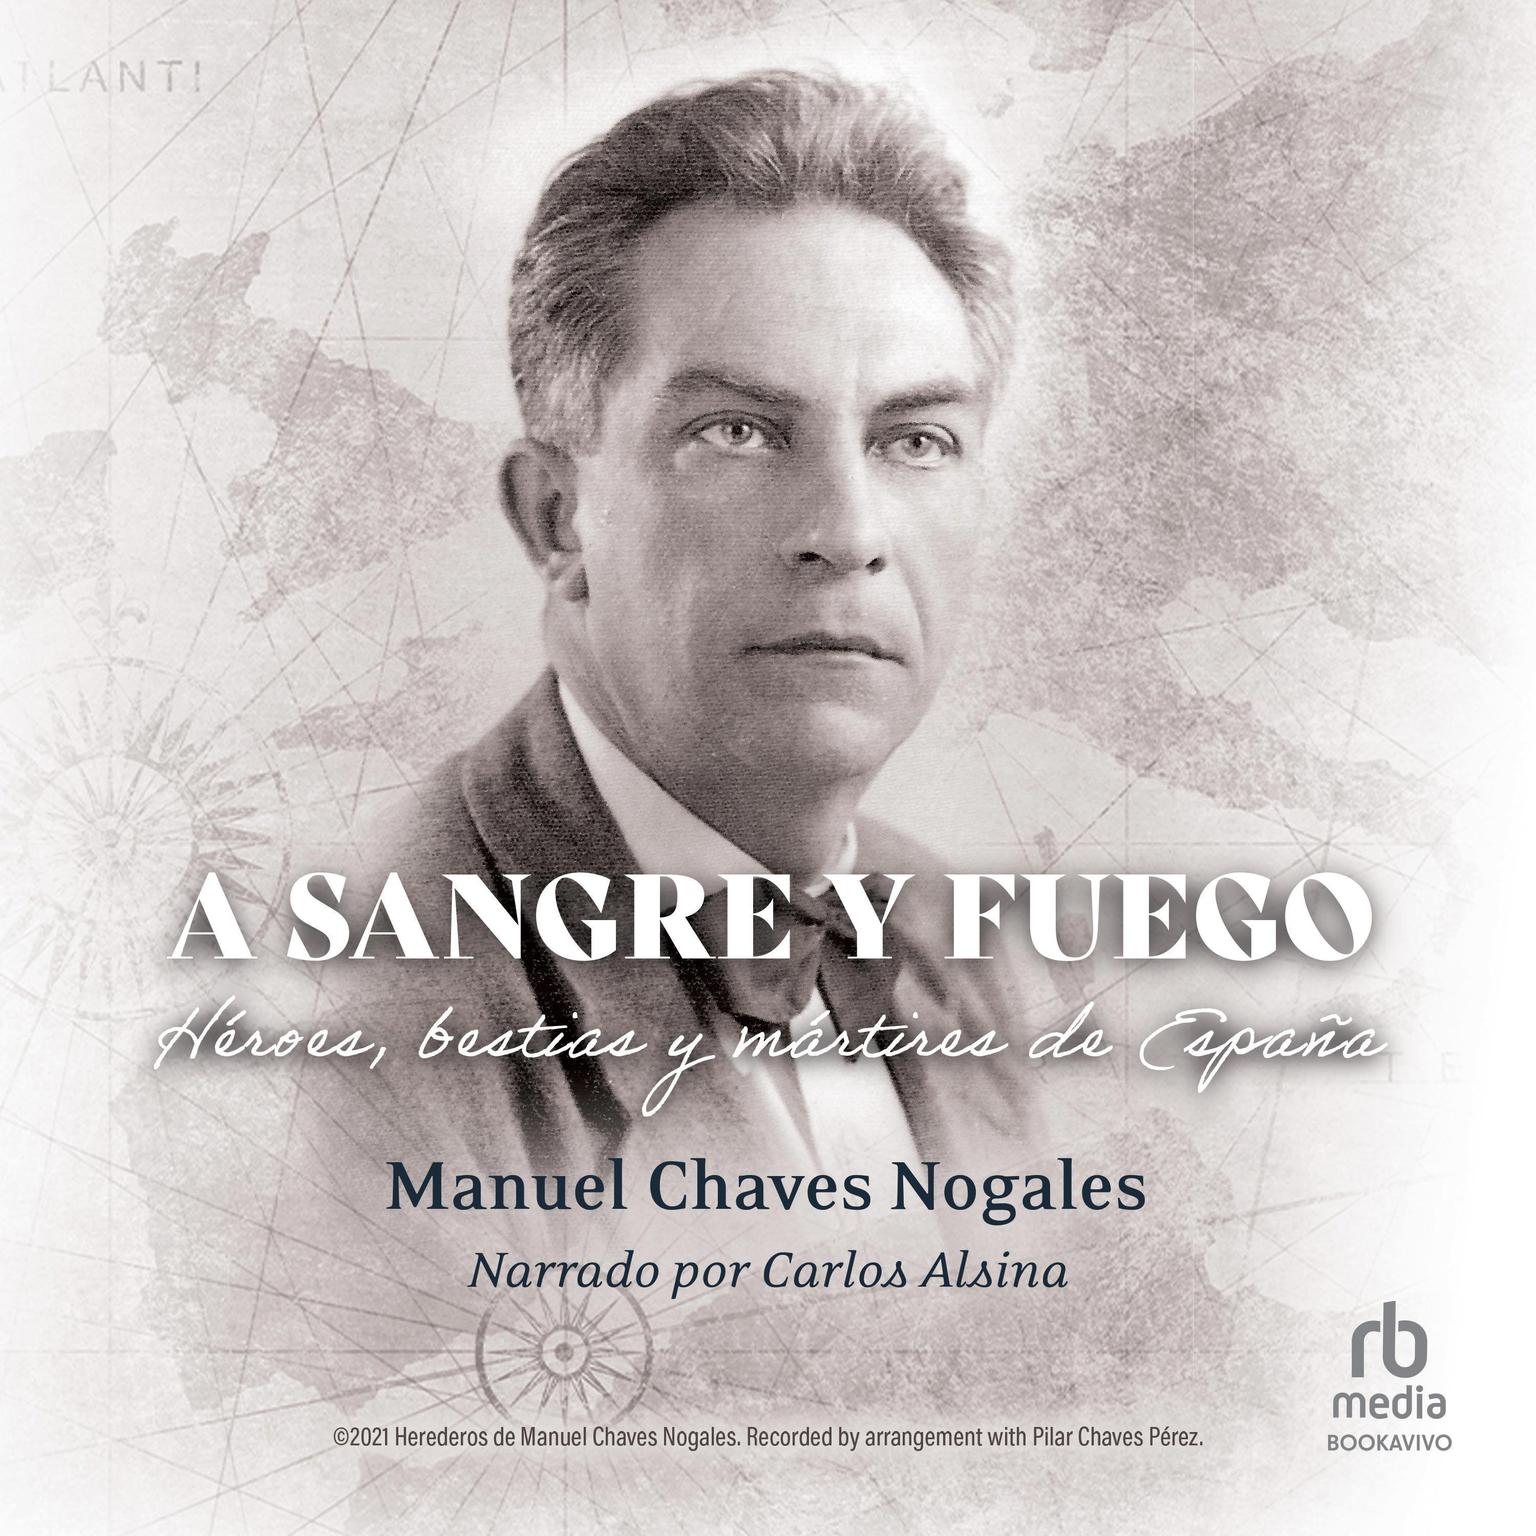 A sangre y fuego (And in the distance a light…?): Heroes, bestias y martires de España (Heroes, Beasts and Martyrs of Spain) Audiobook, by Manuel Chaves Nogales